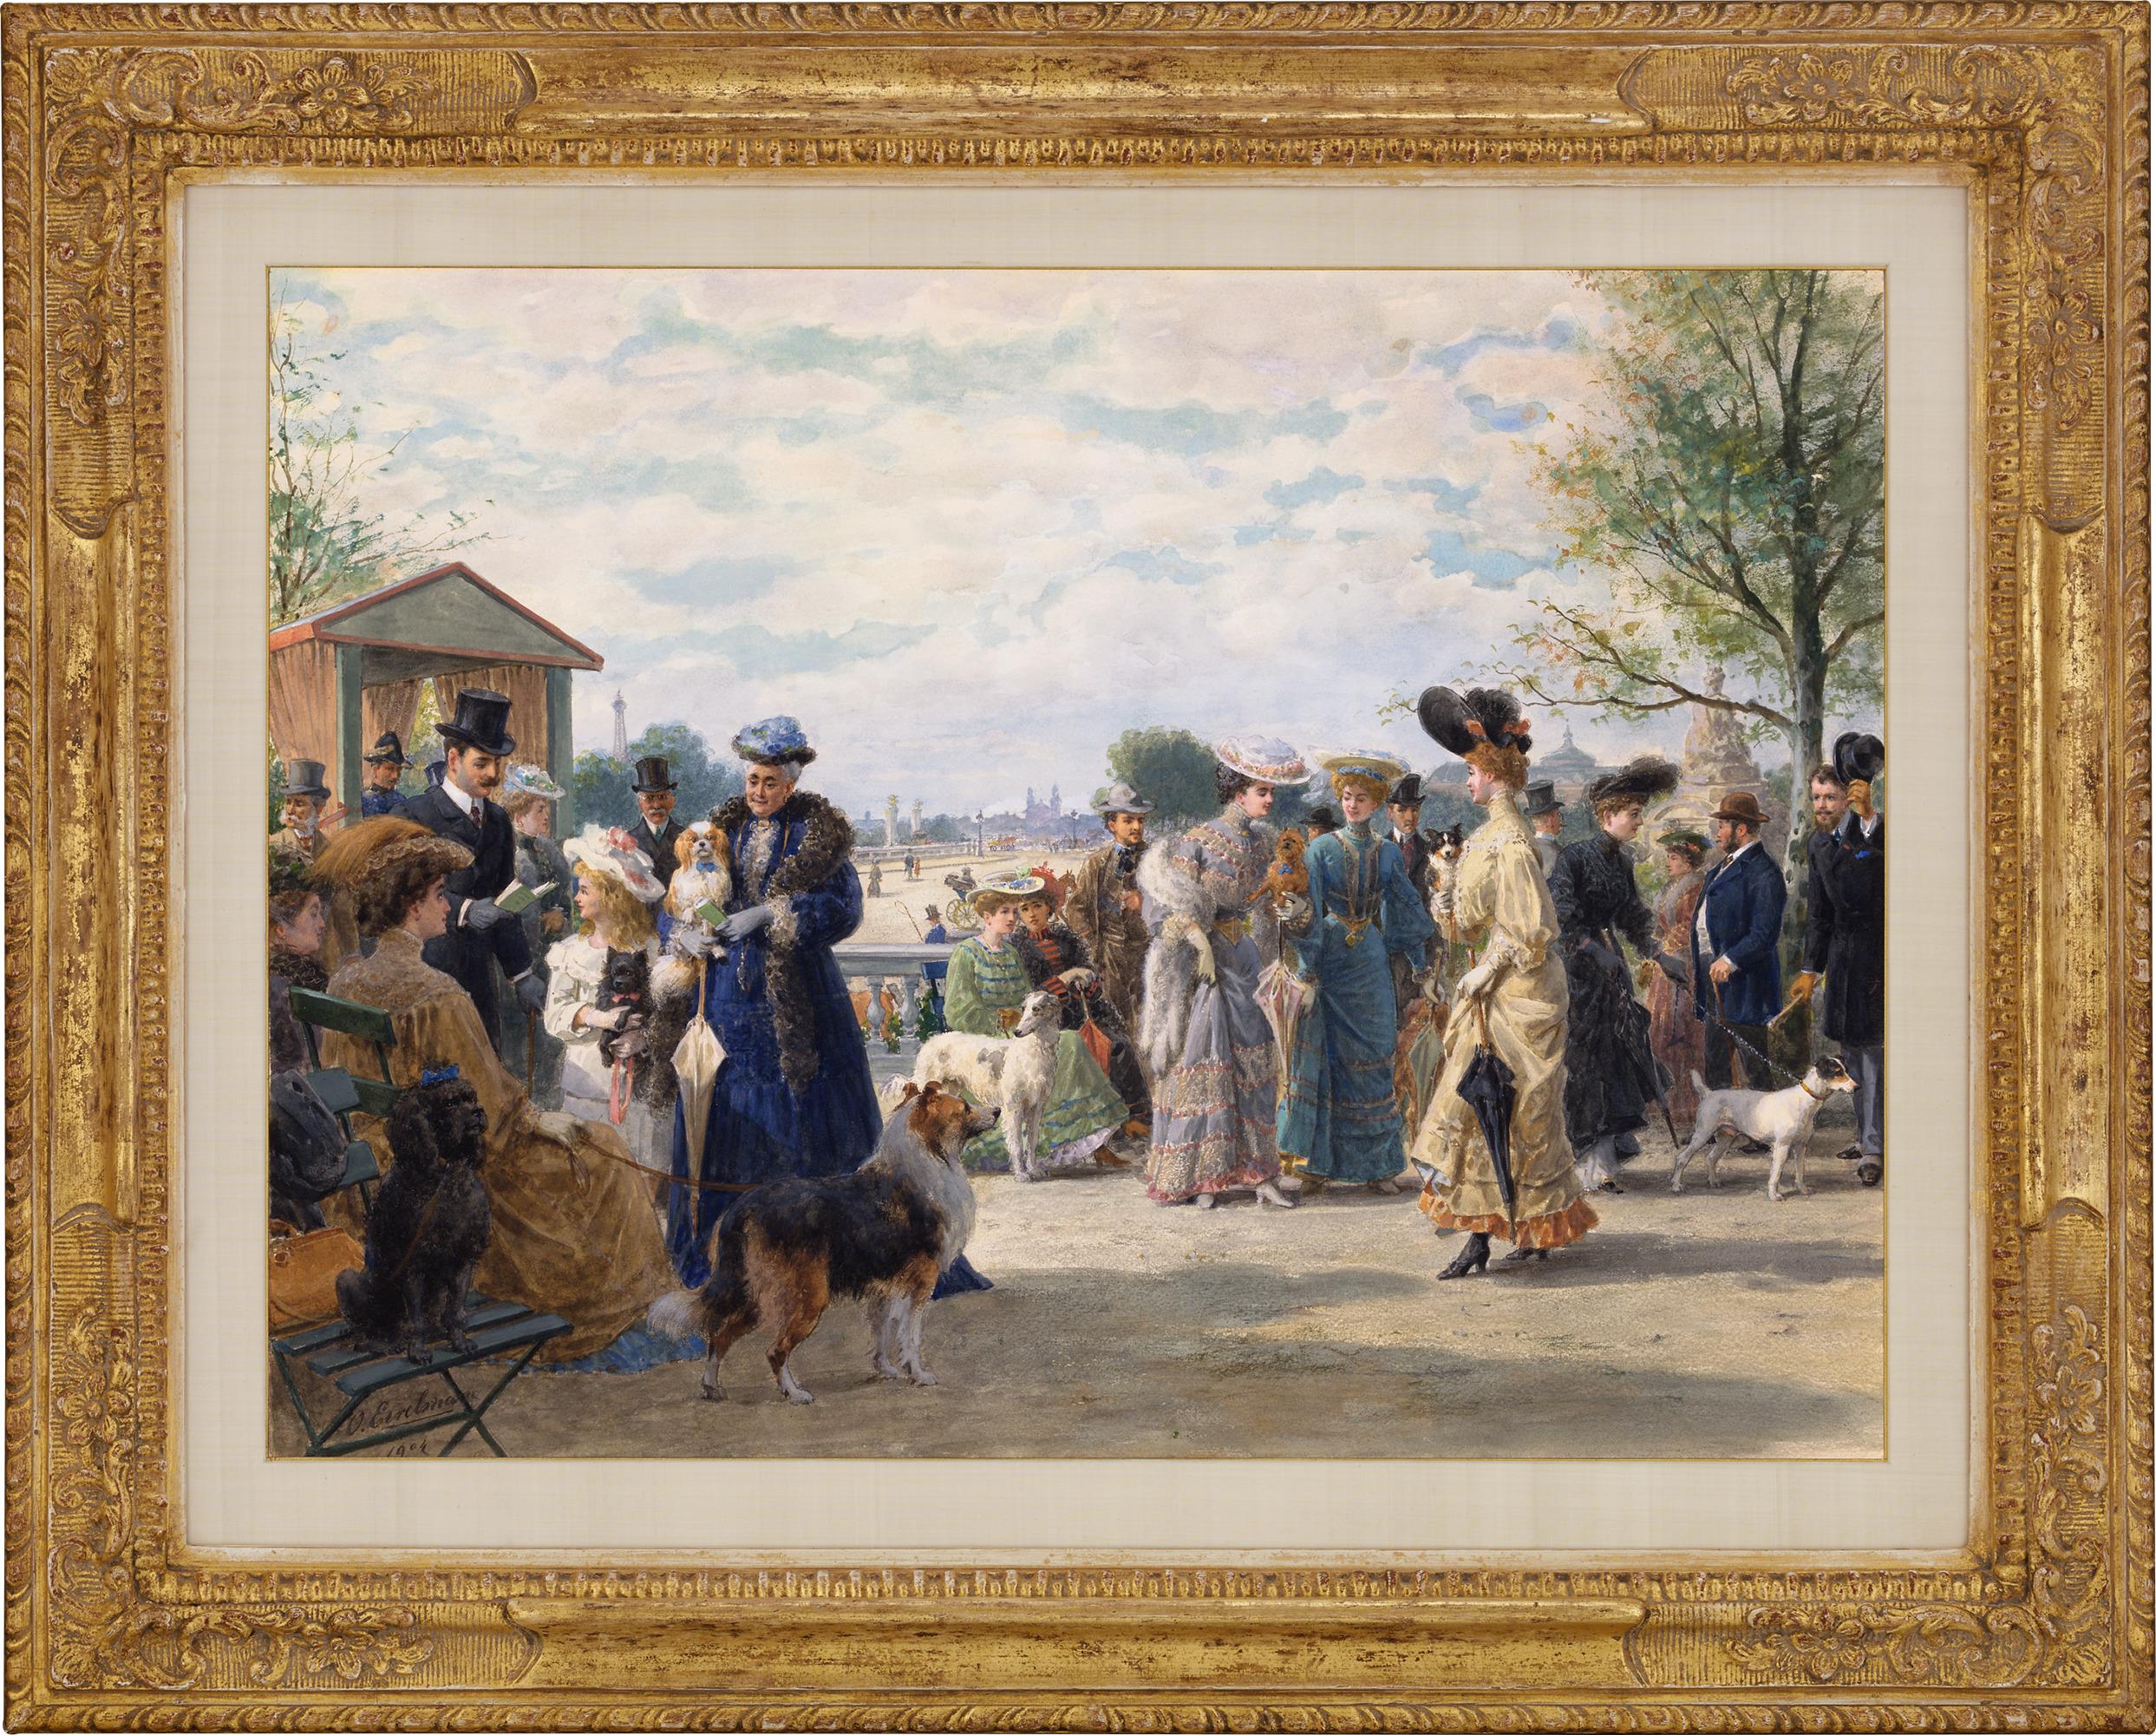 Otto Eerelman
1839-1926  Dutch

Concours de Chiens au Promenade

Watercolor on paper
Signed “O. Eerelman 1904” (lower left)

A tour de force watercolor by celebrated Dutch artist Otto Eerelman, one of 19th-century Europe's most popular and important